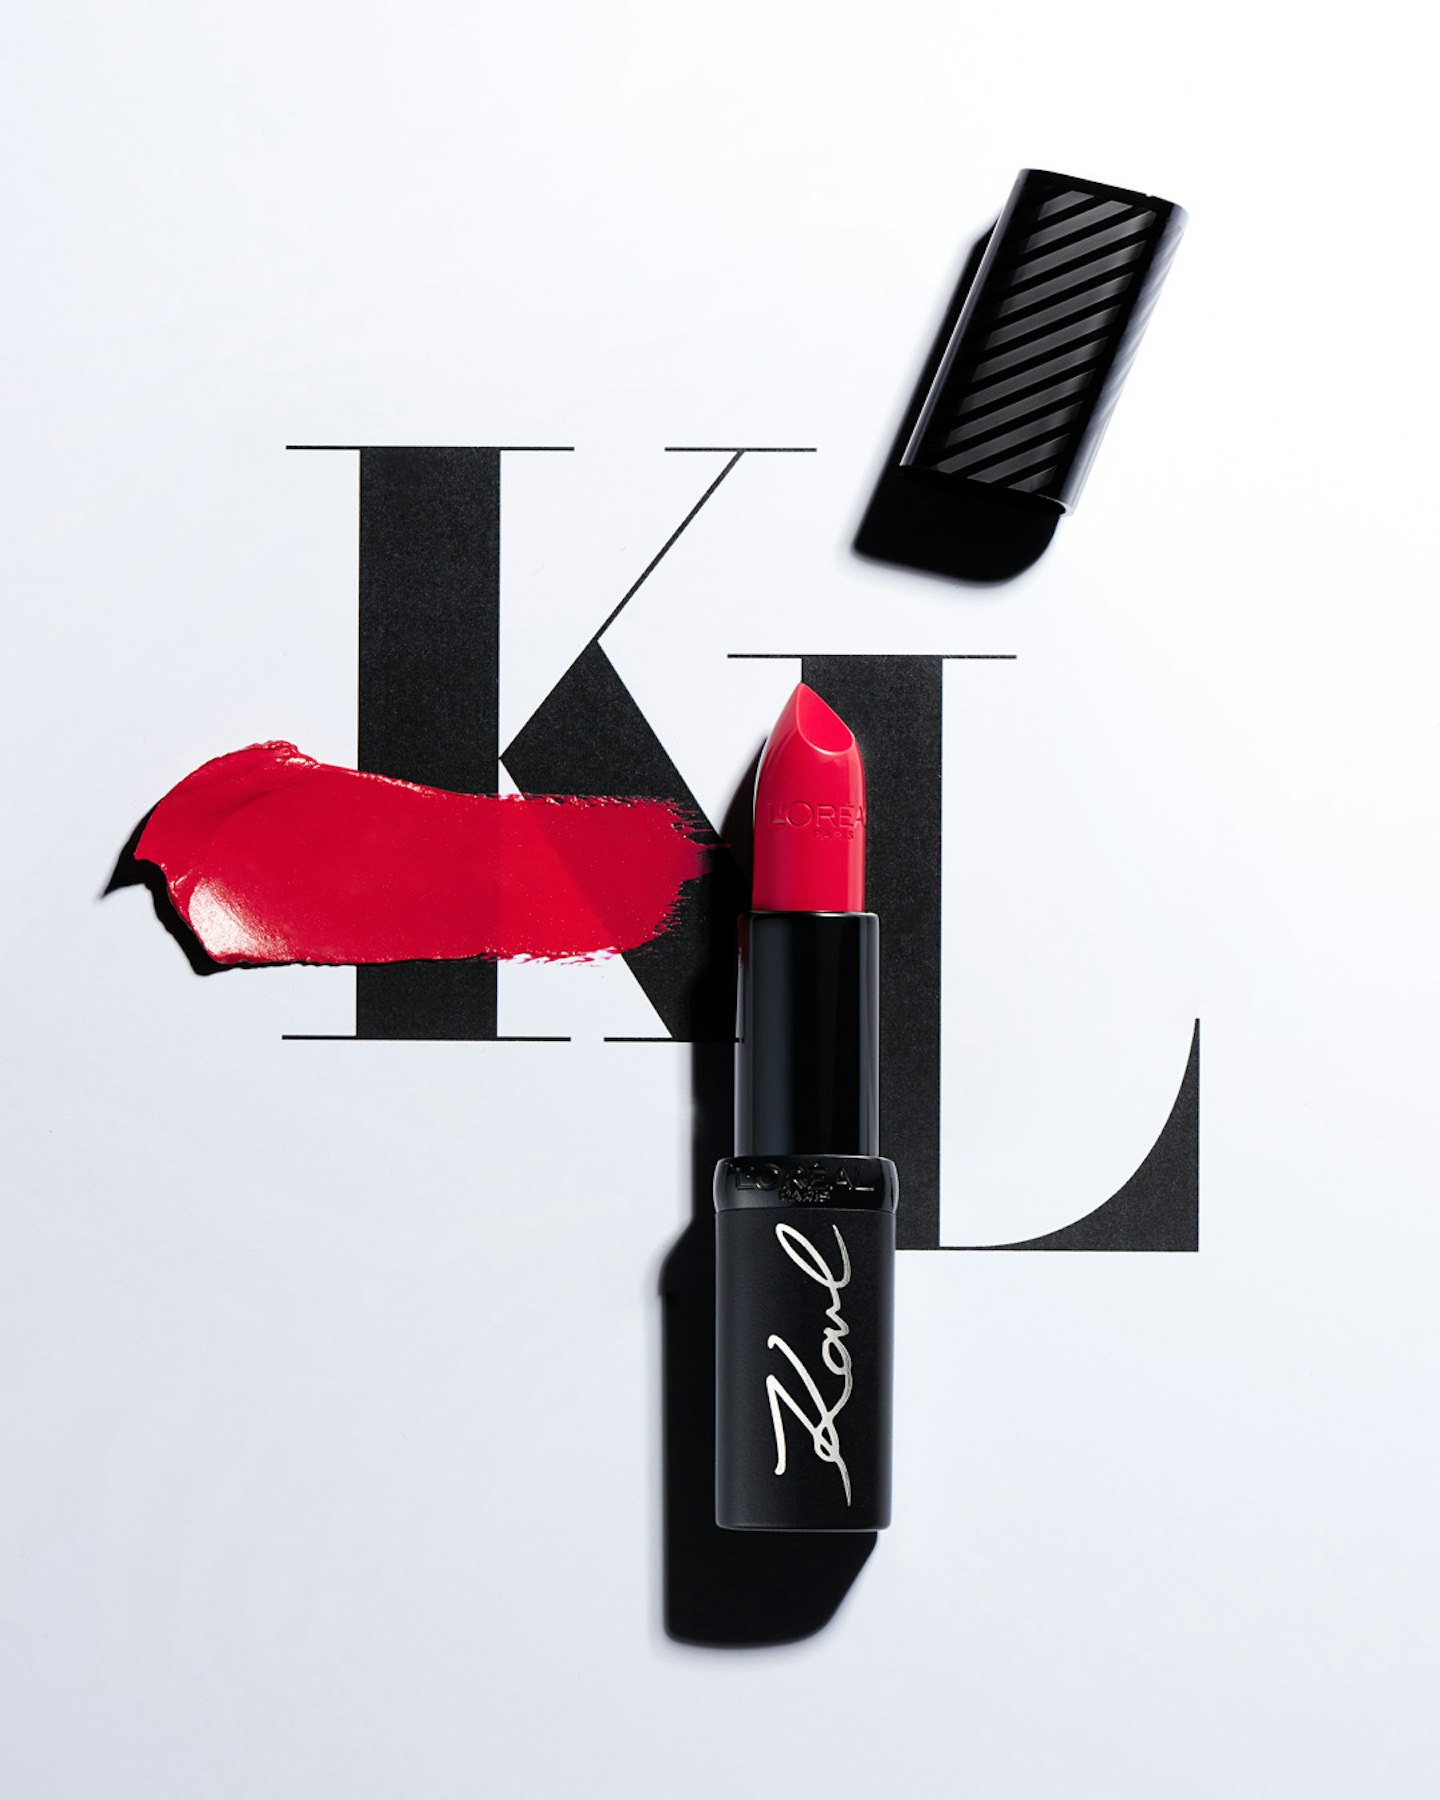 Karl Lagerfeld x L'Oreal Paris Collection 